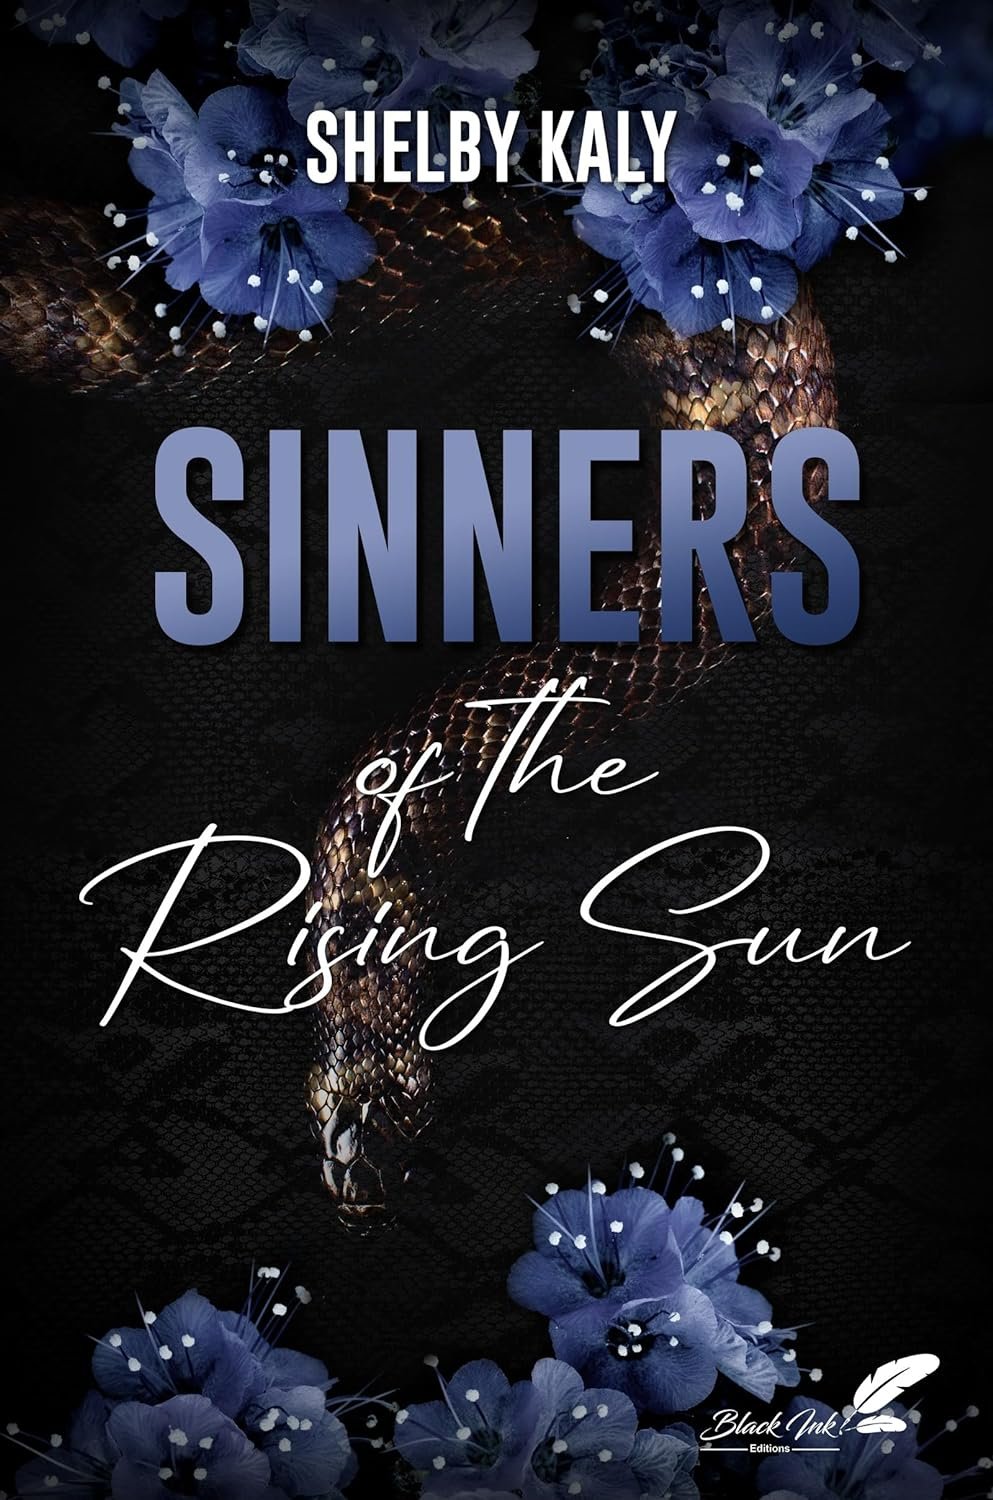 Shelby Kaly - Sinners of the rising sun